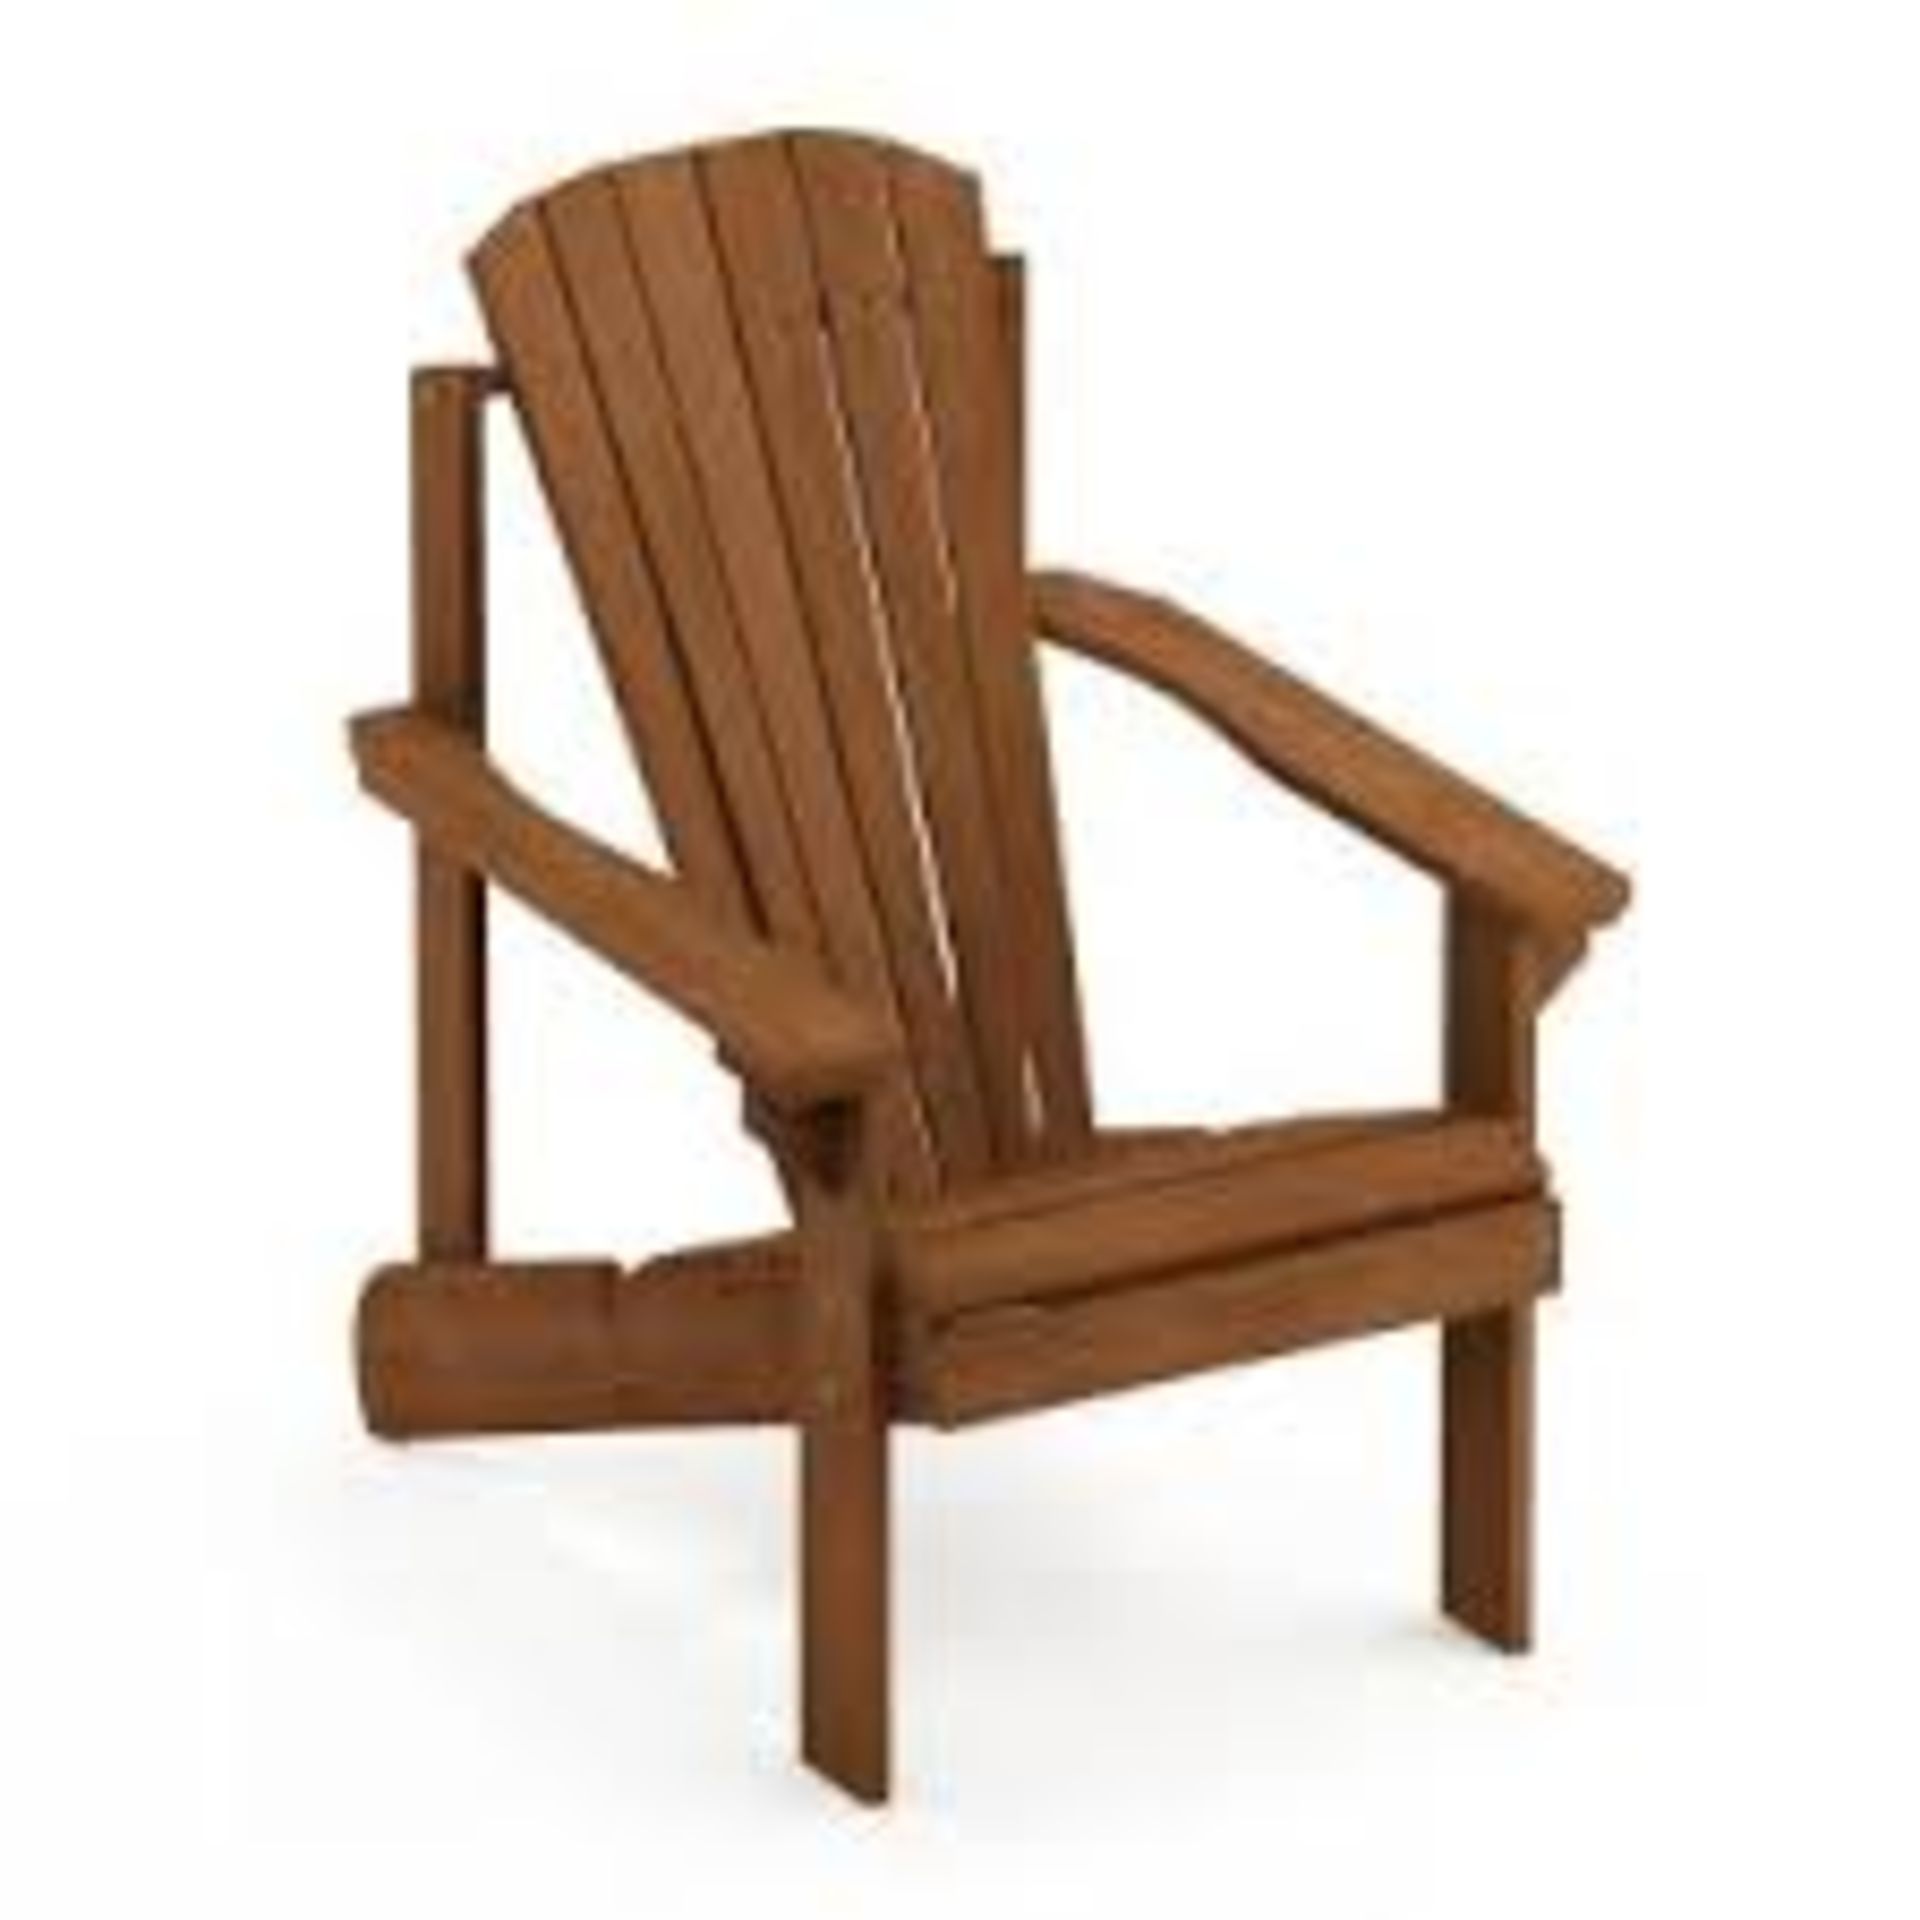 Boxed Furinno New Adirondack Solid Wooden Dining Chair RRP£130 (Viewing or Appraisals Highly